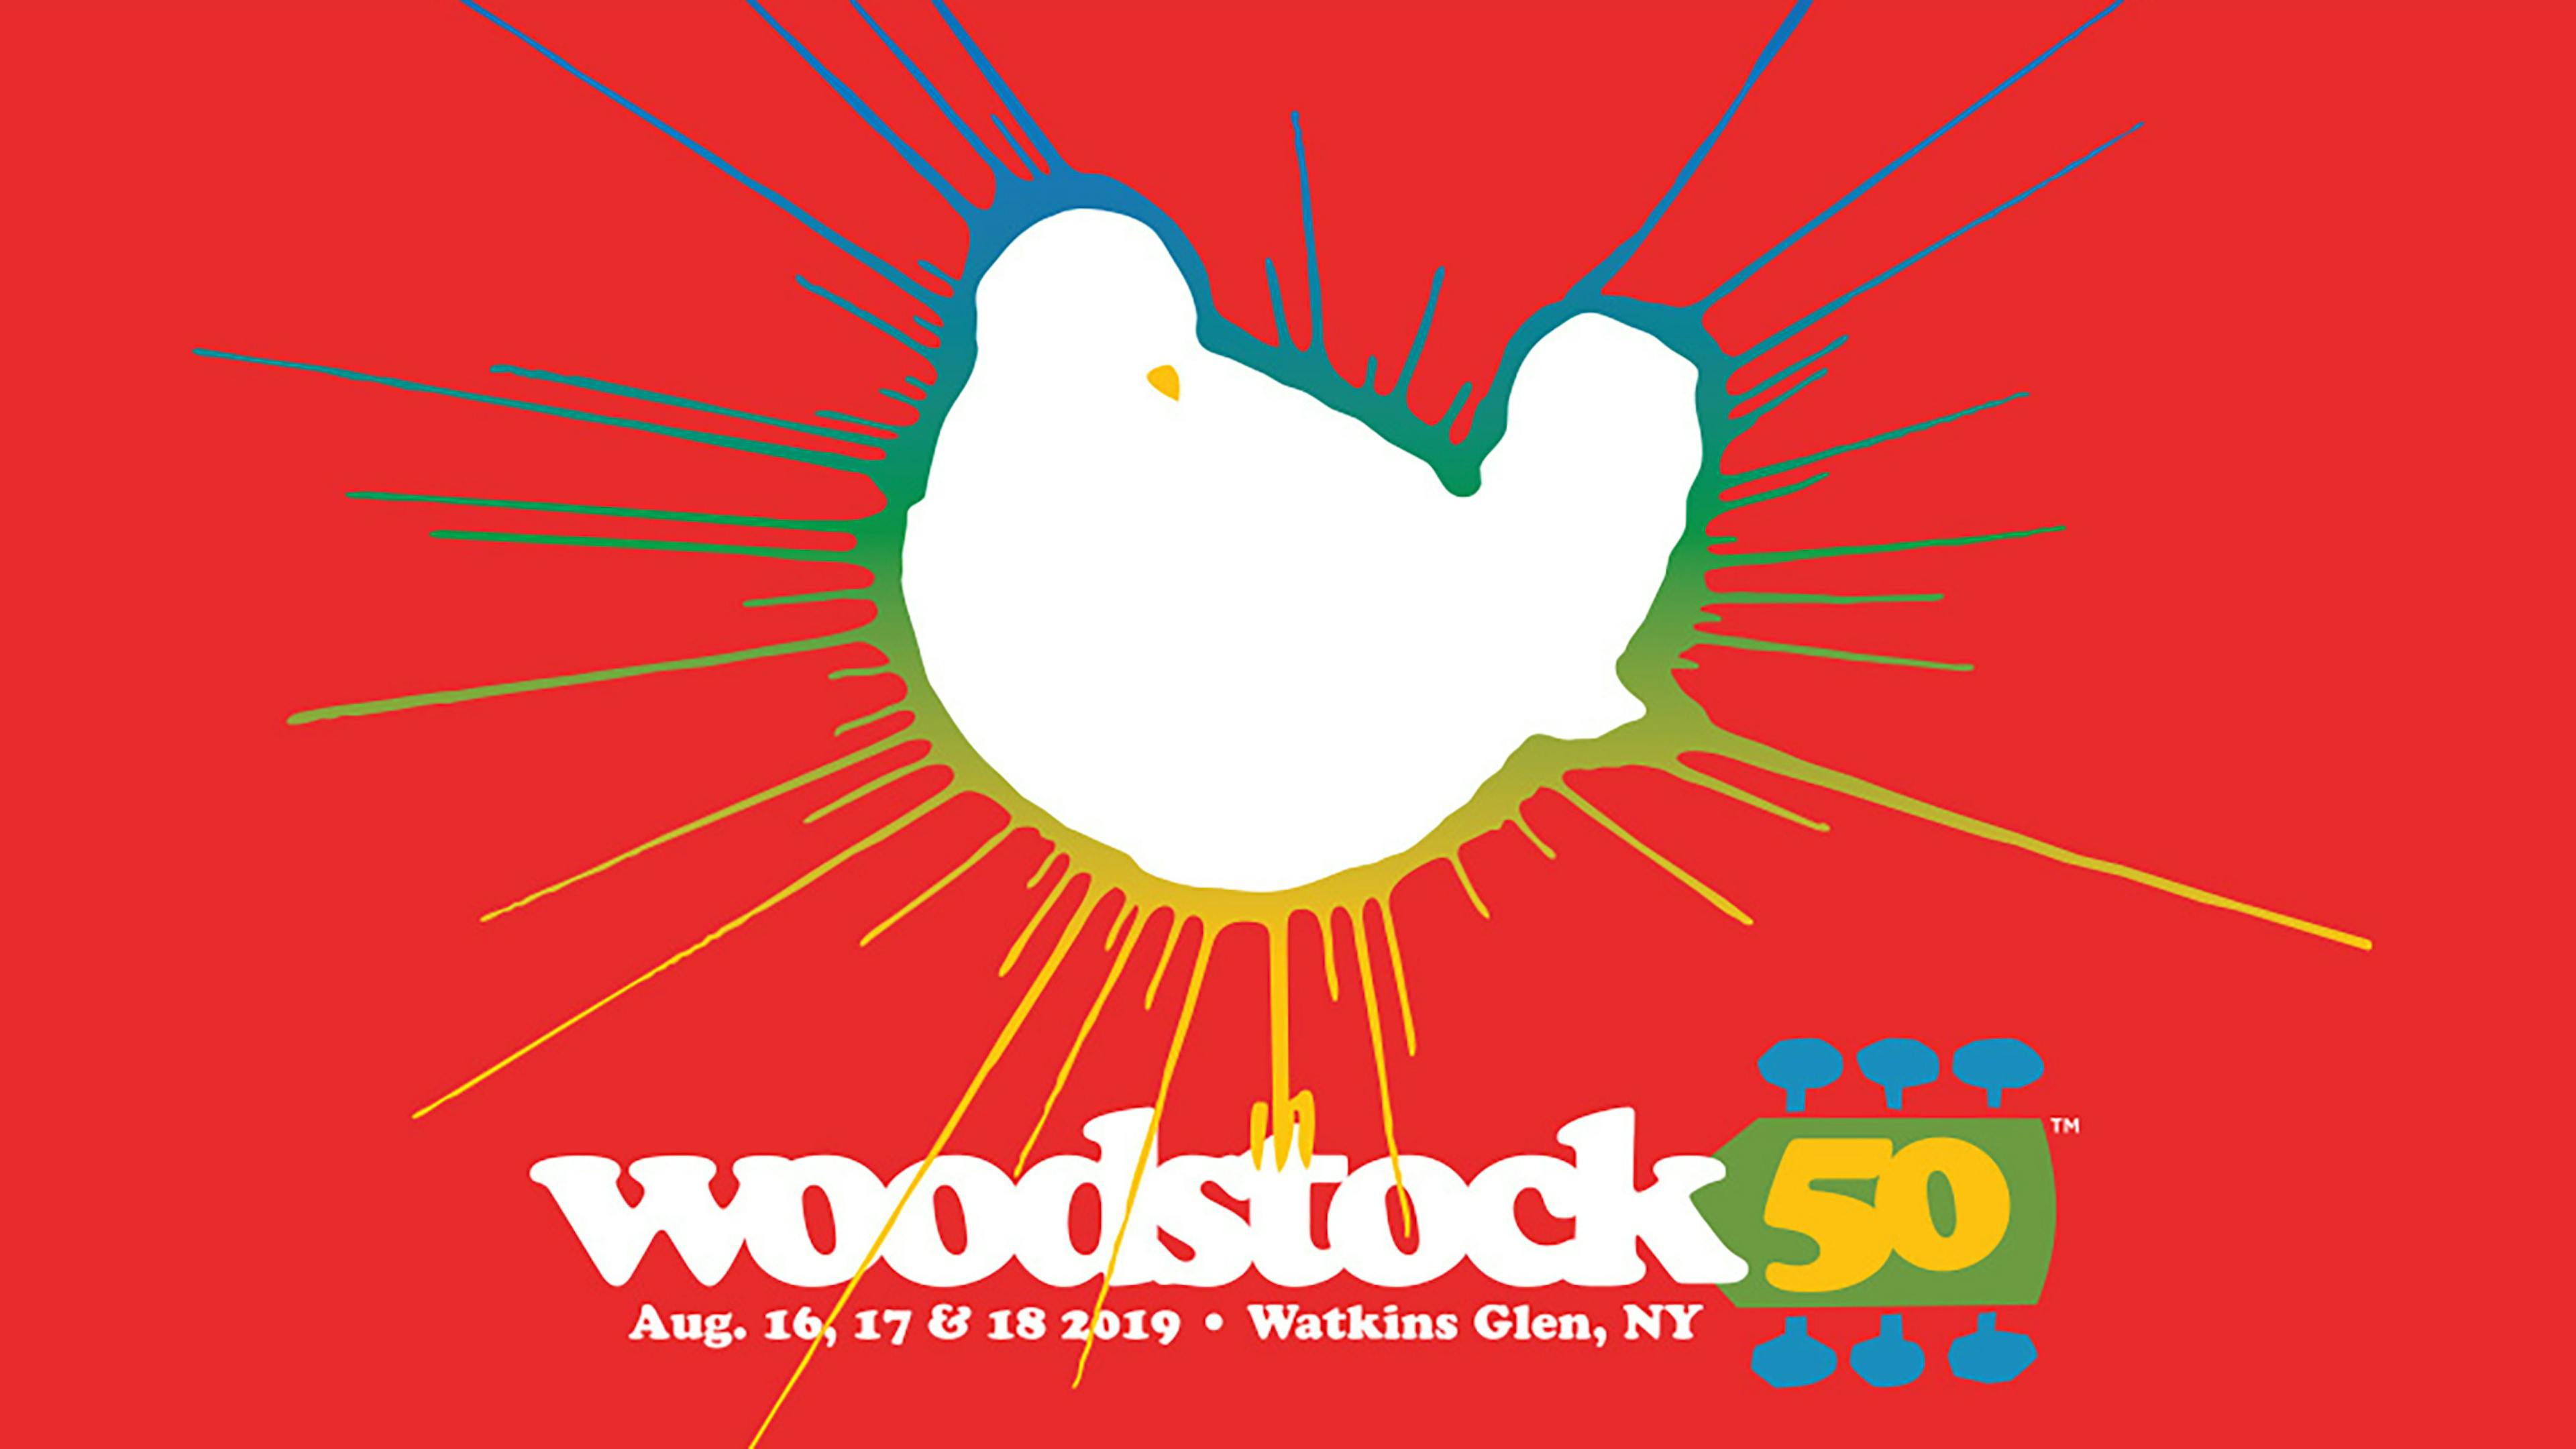 Woodstock 50 Organizer Says Financial Backers "Don't Have A Right" To Cancel Festival